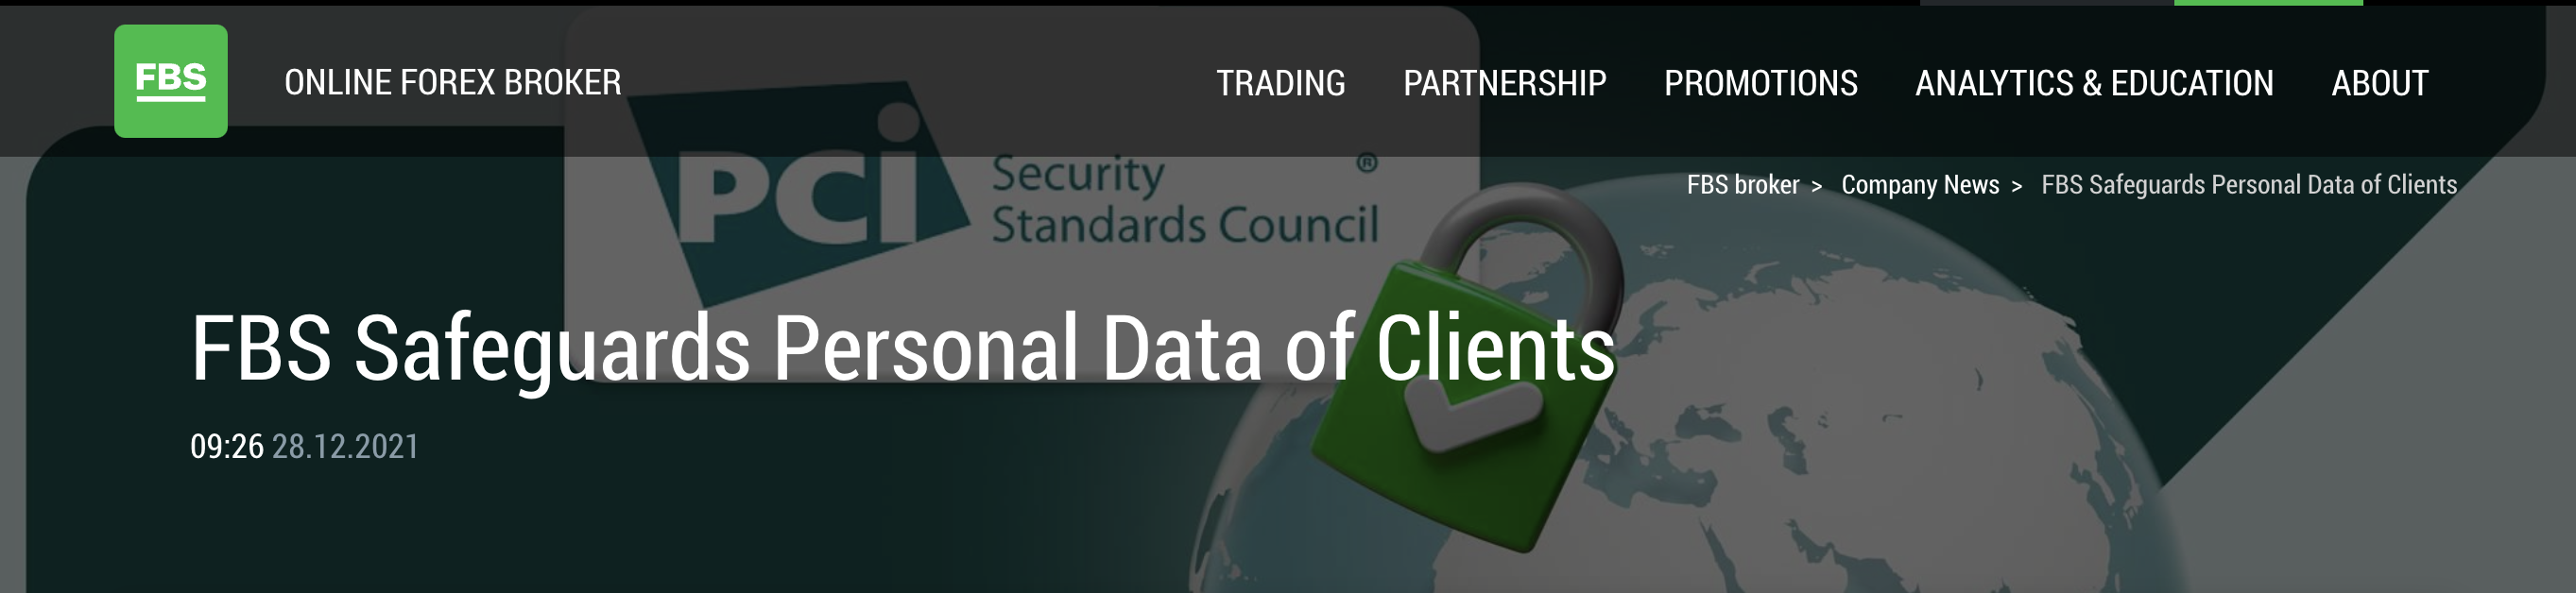 FBS Client Fund Security and Safety Features